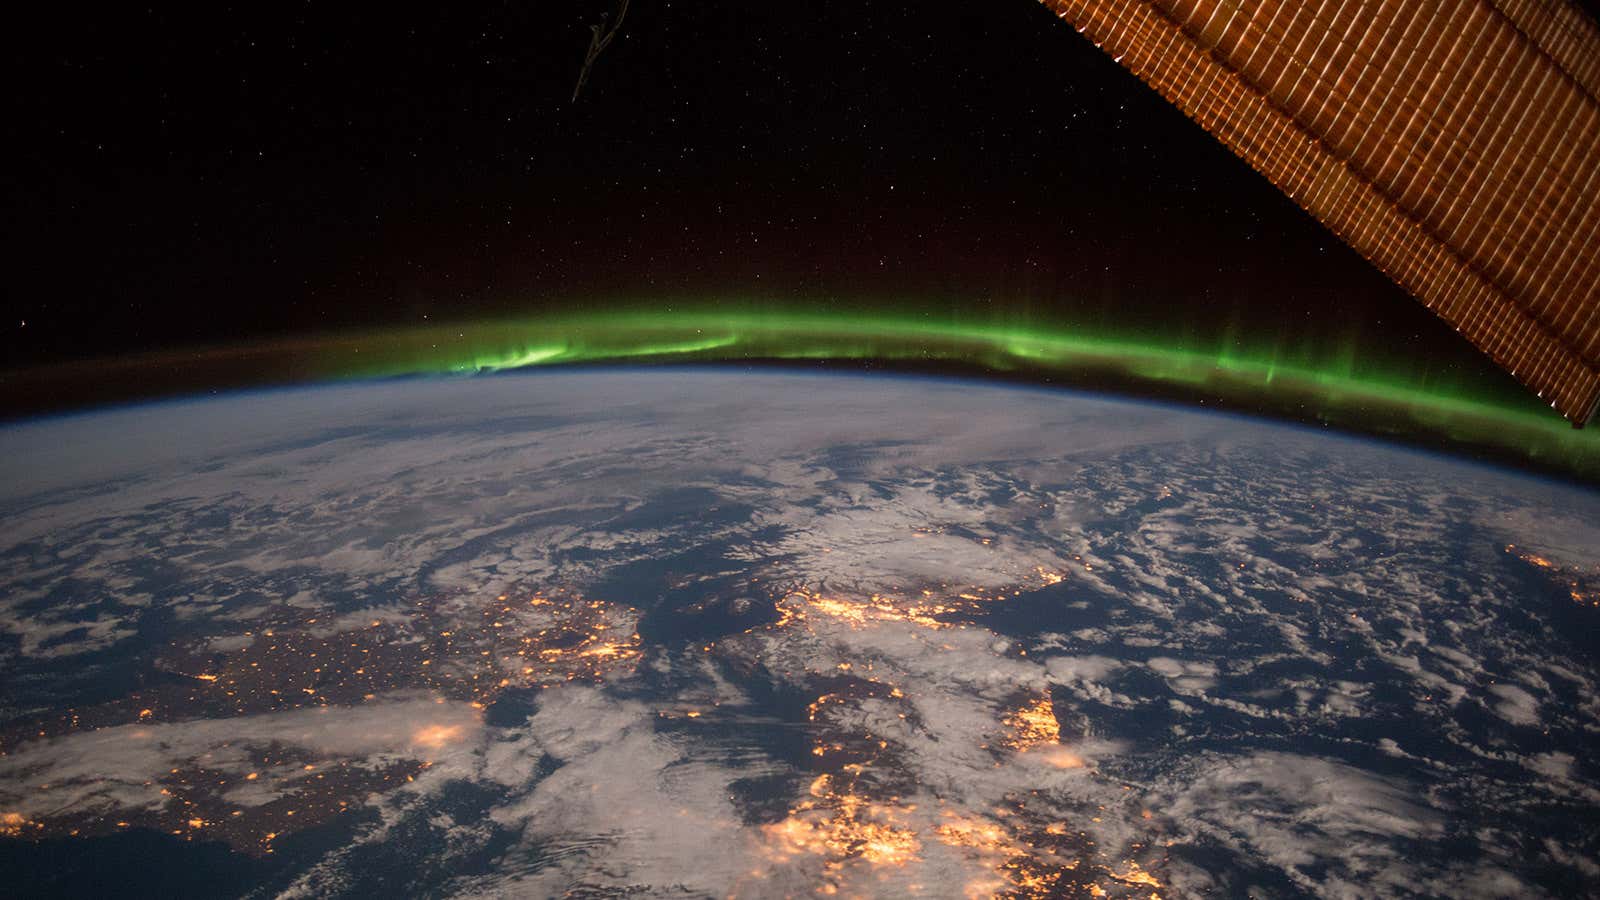 A moonlit night under an amazing and ever-changing aurora captured from the International Space Station by astronaut Terry Virts.